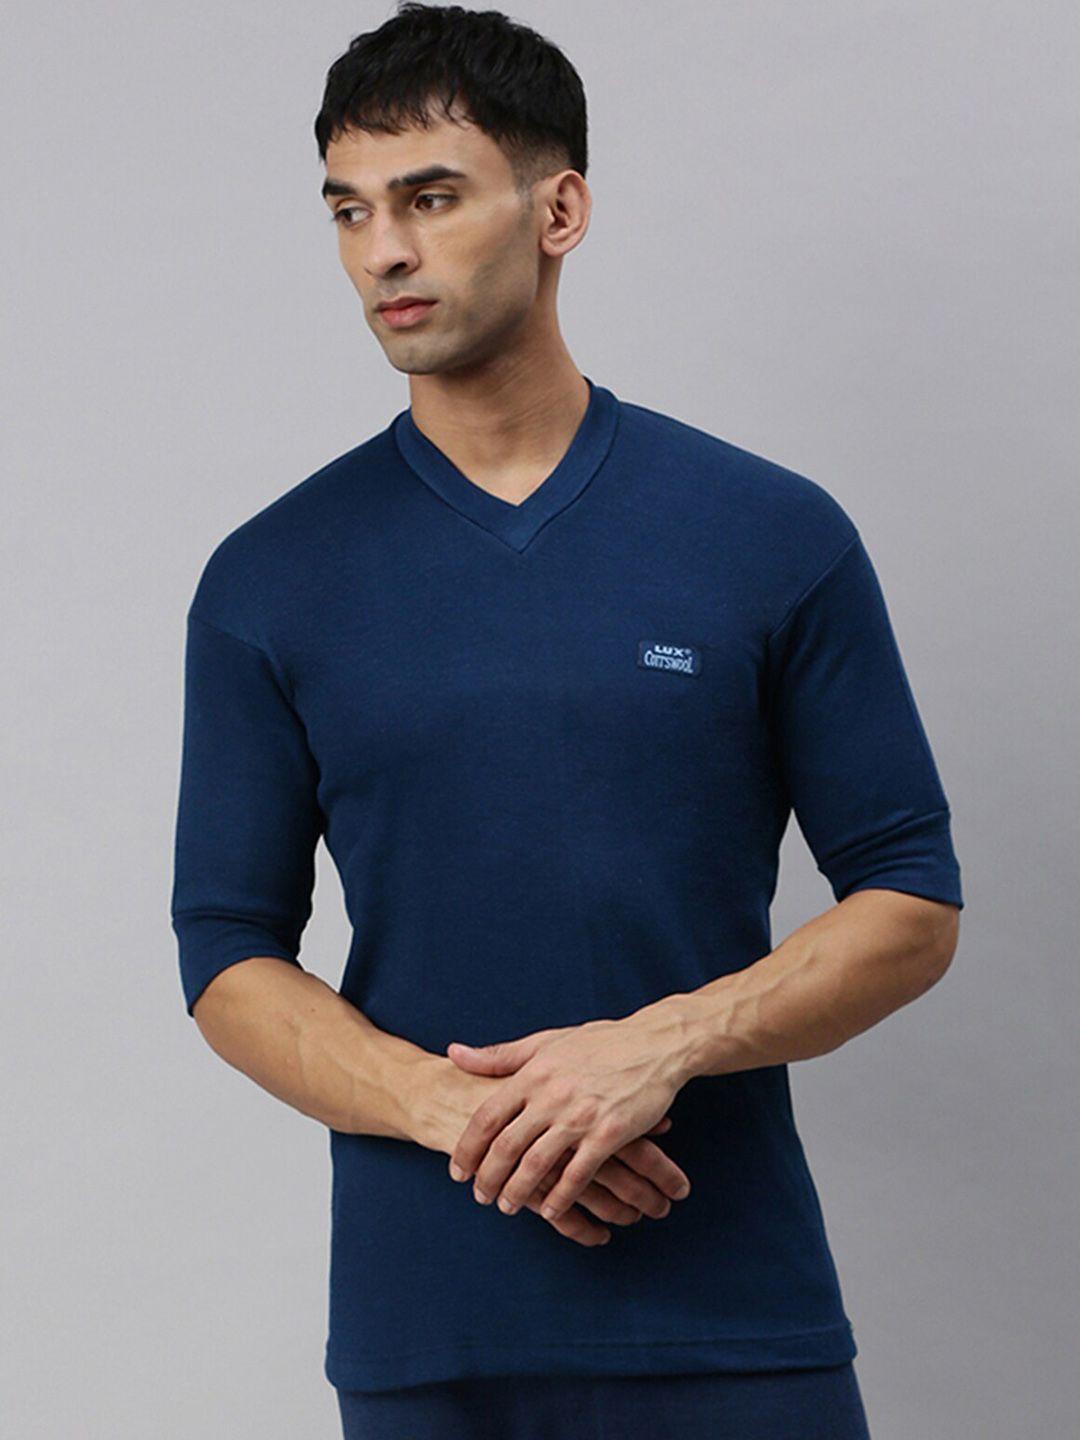 lux cottswool v-neck short sleeves wool thermal tops